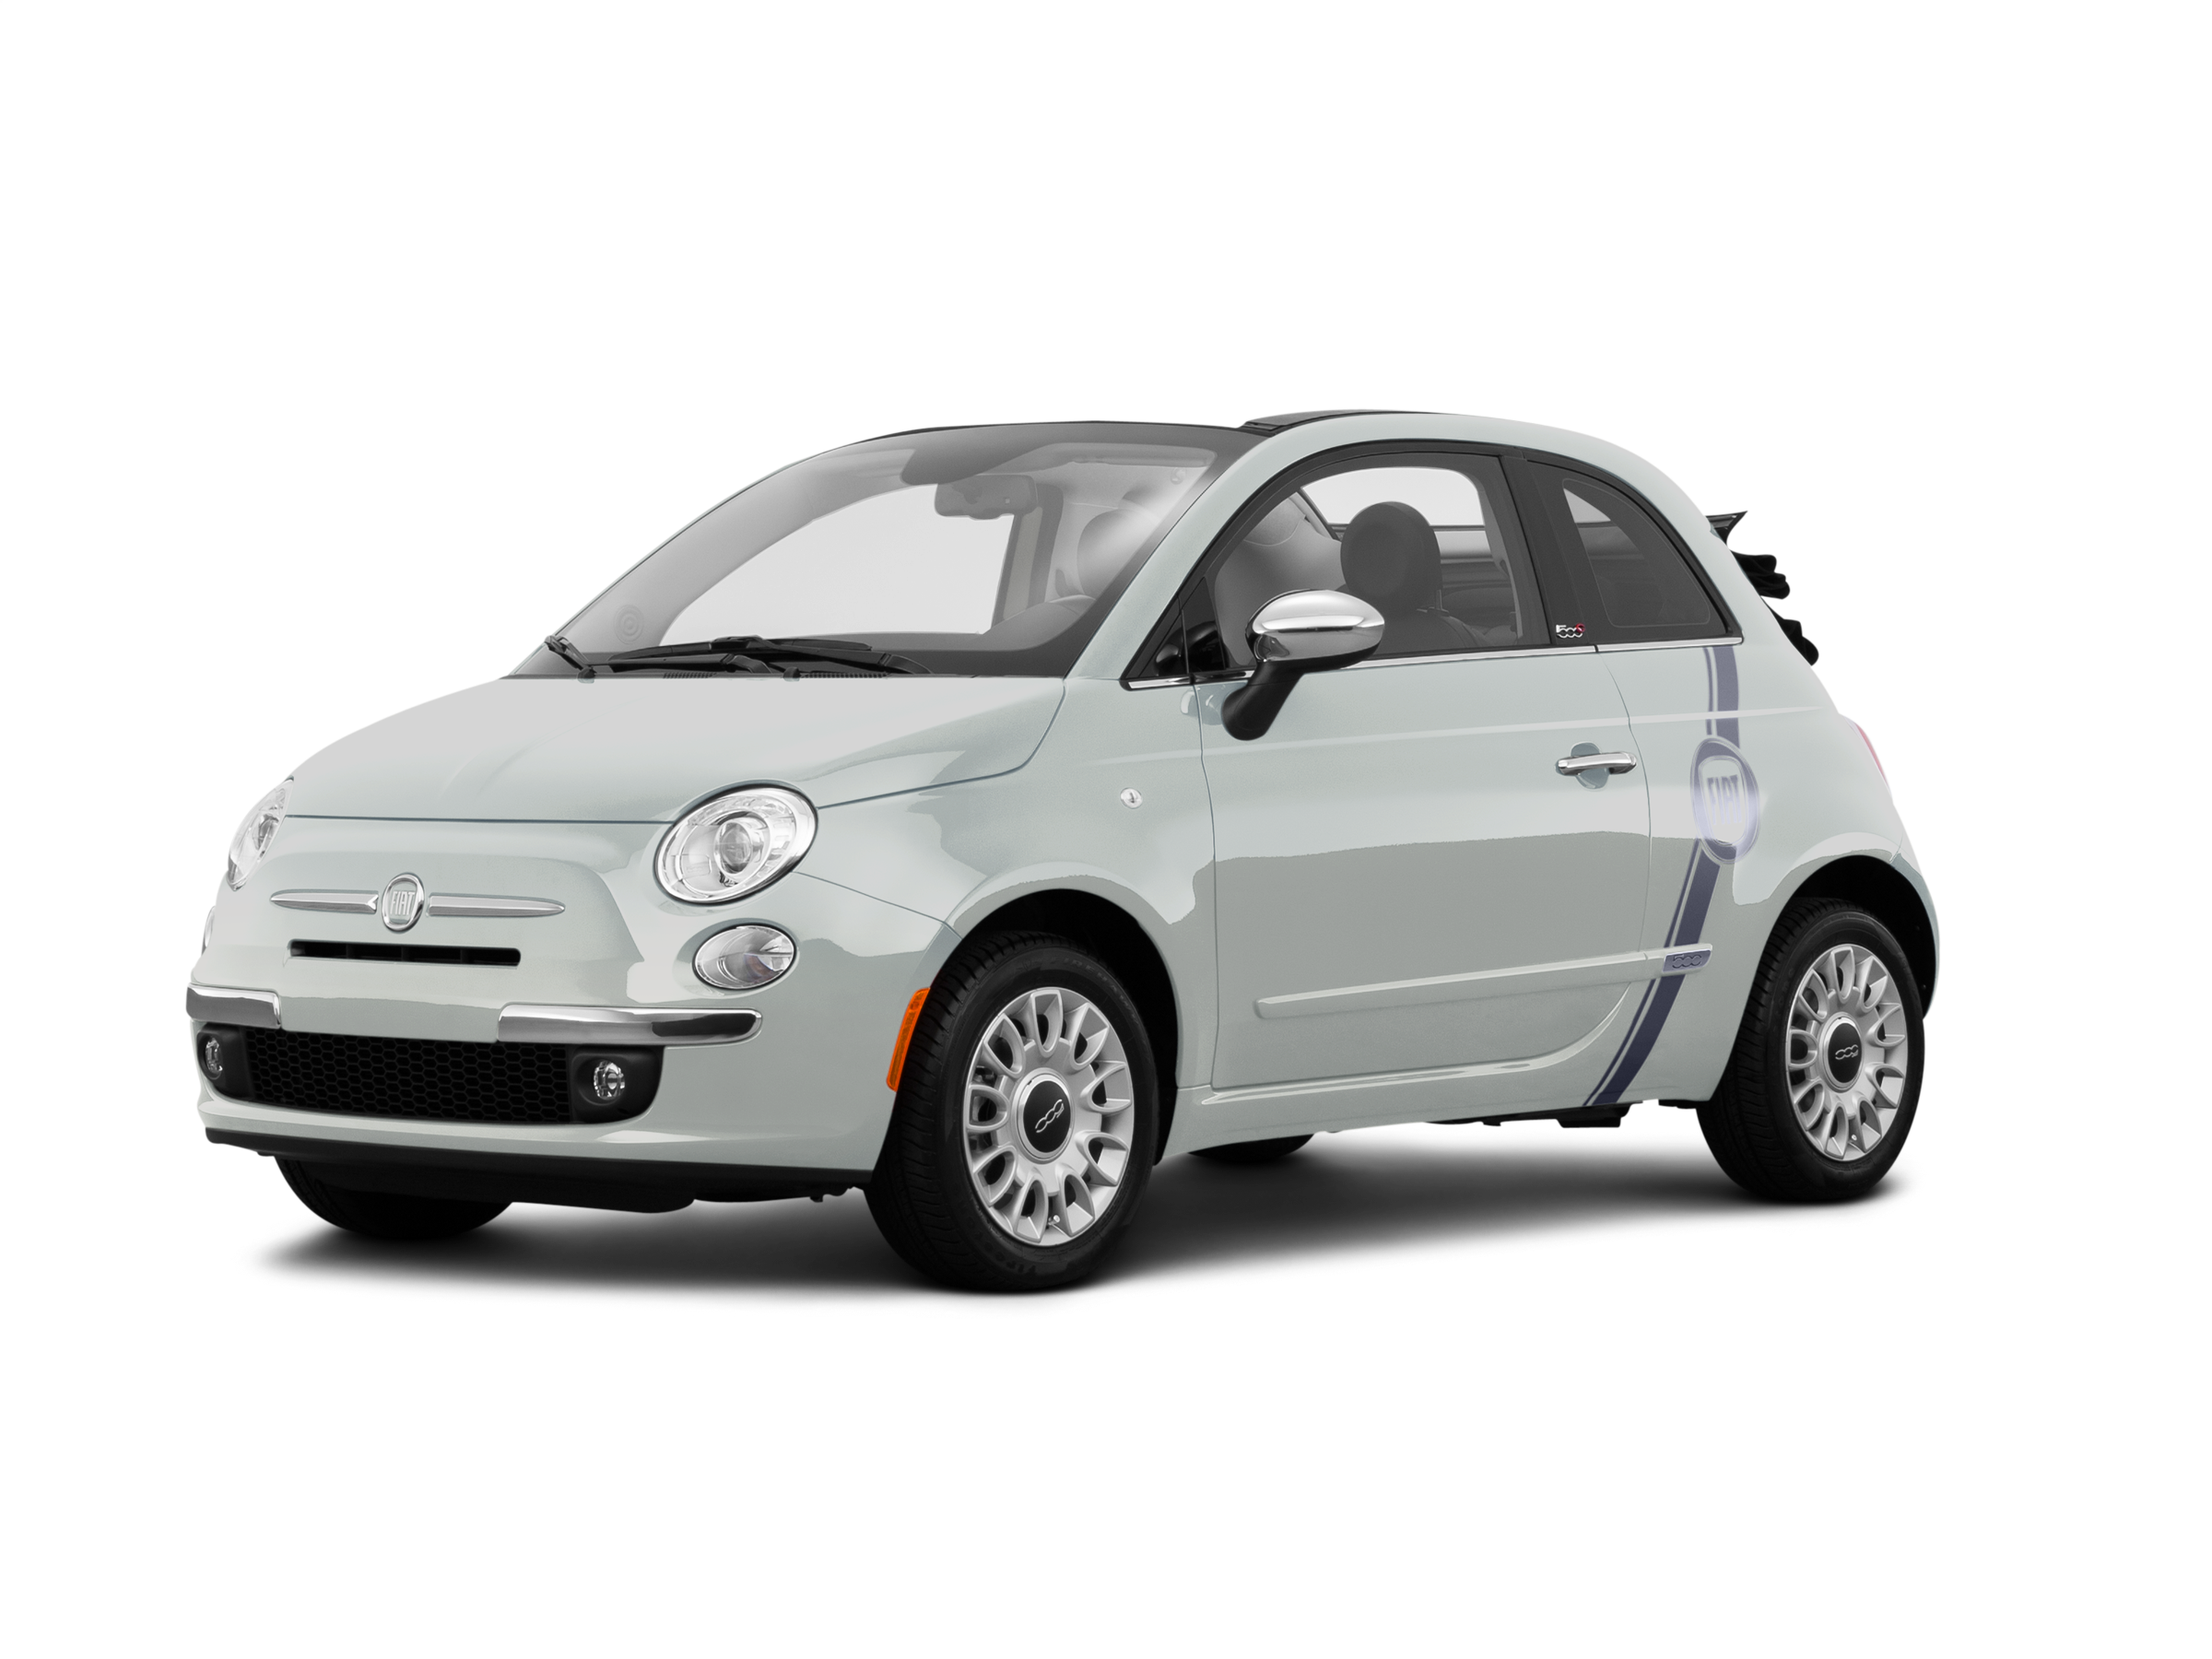 FIAT Price, Value, Ratings & Reviews | Kelley Blue Book